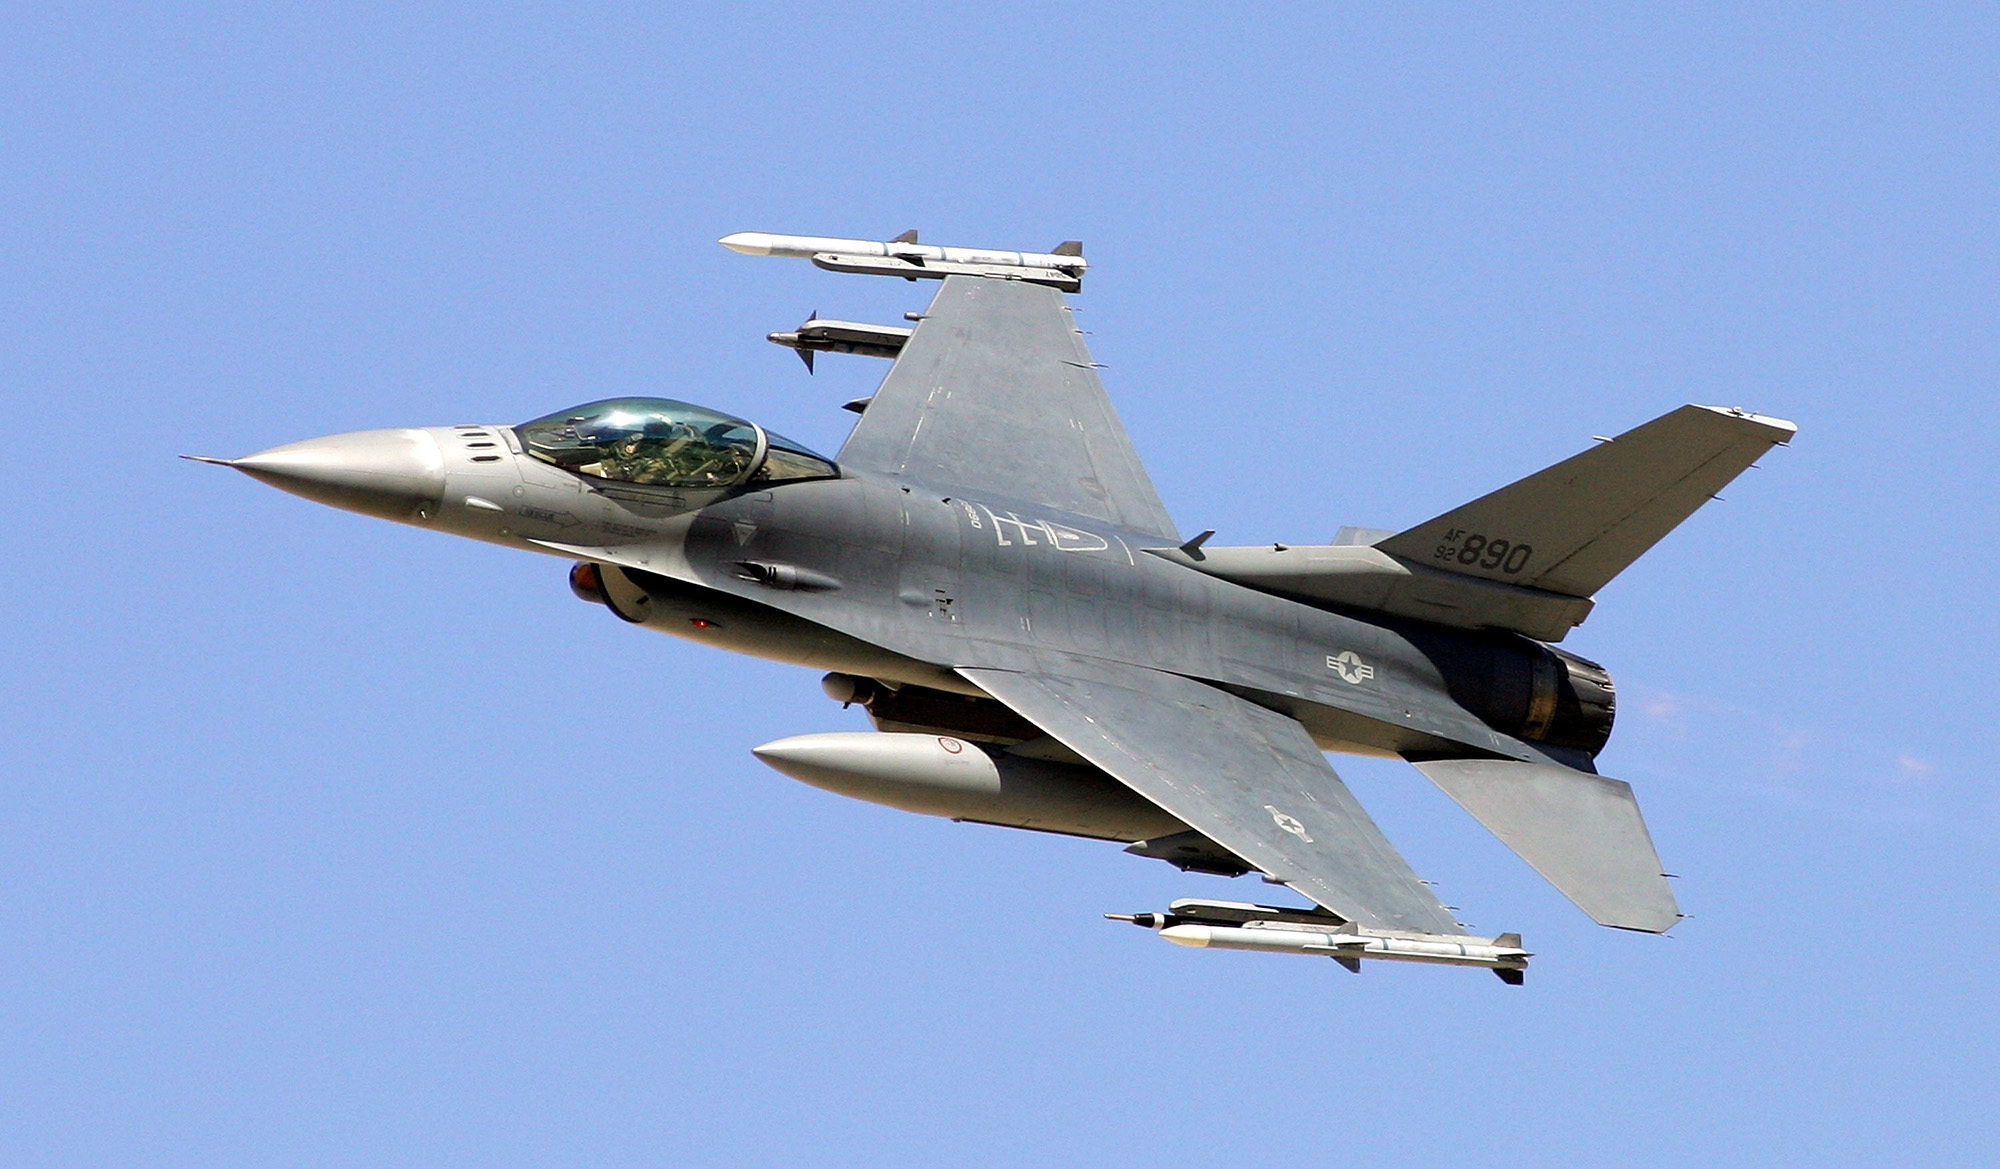 An F-16C Fighting Falcon flies at the Nevada Test and Training Range, on September 14, 2007, near Indian Springs, Nevada. 